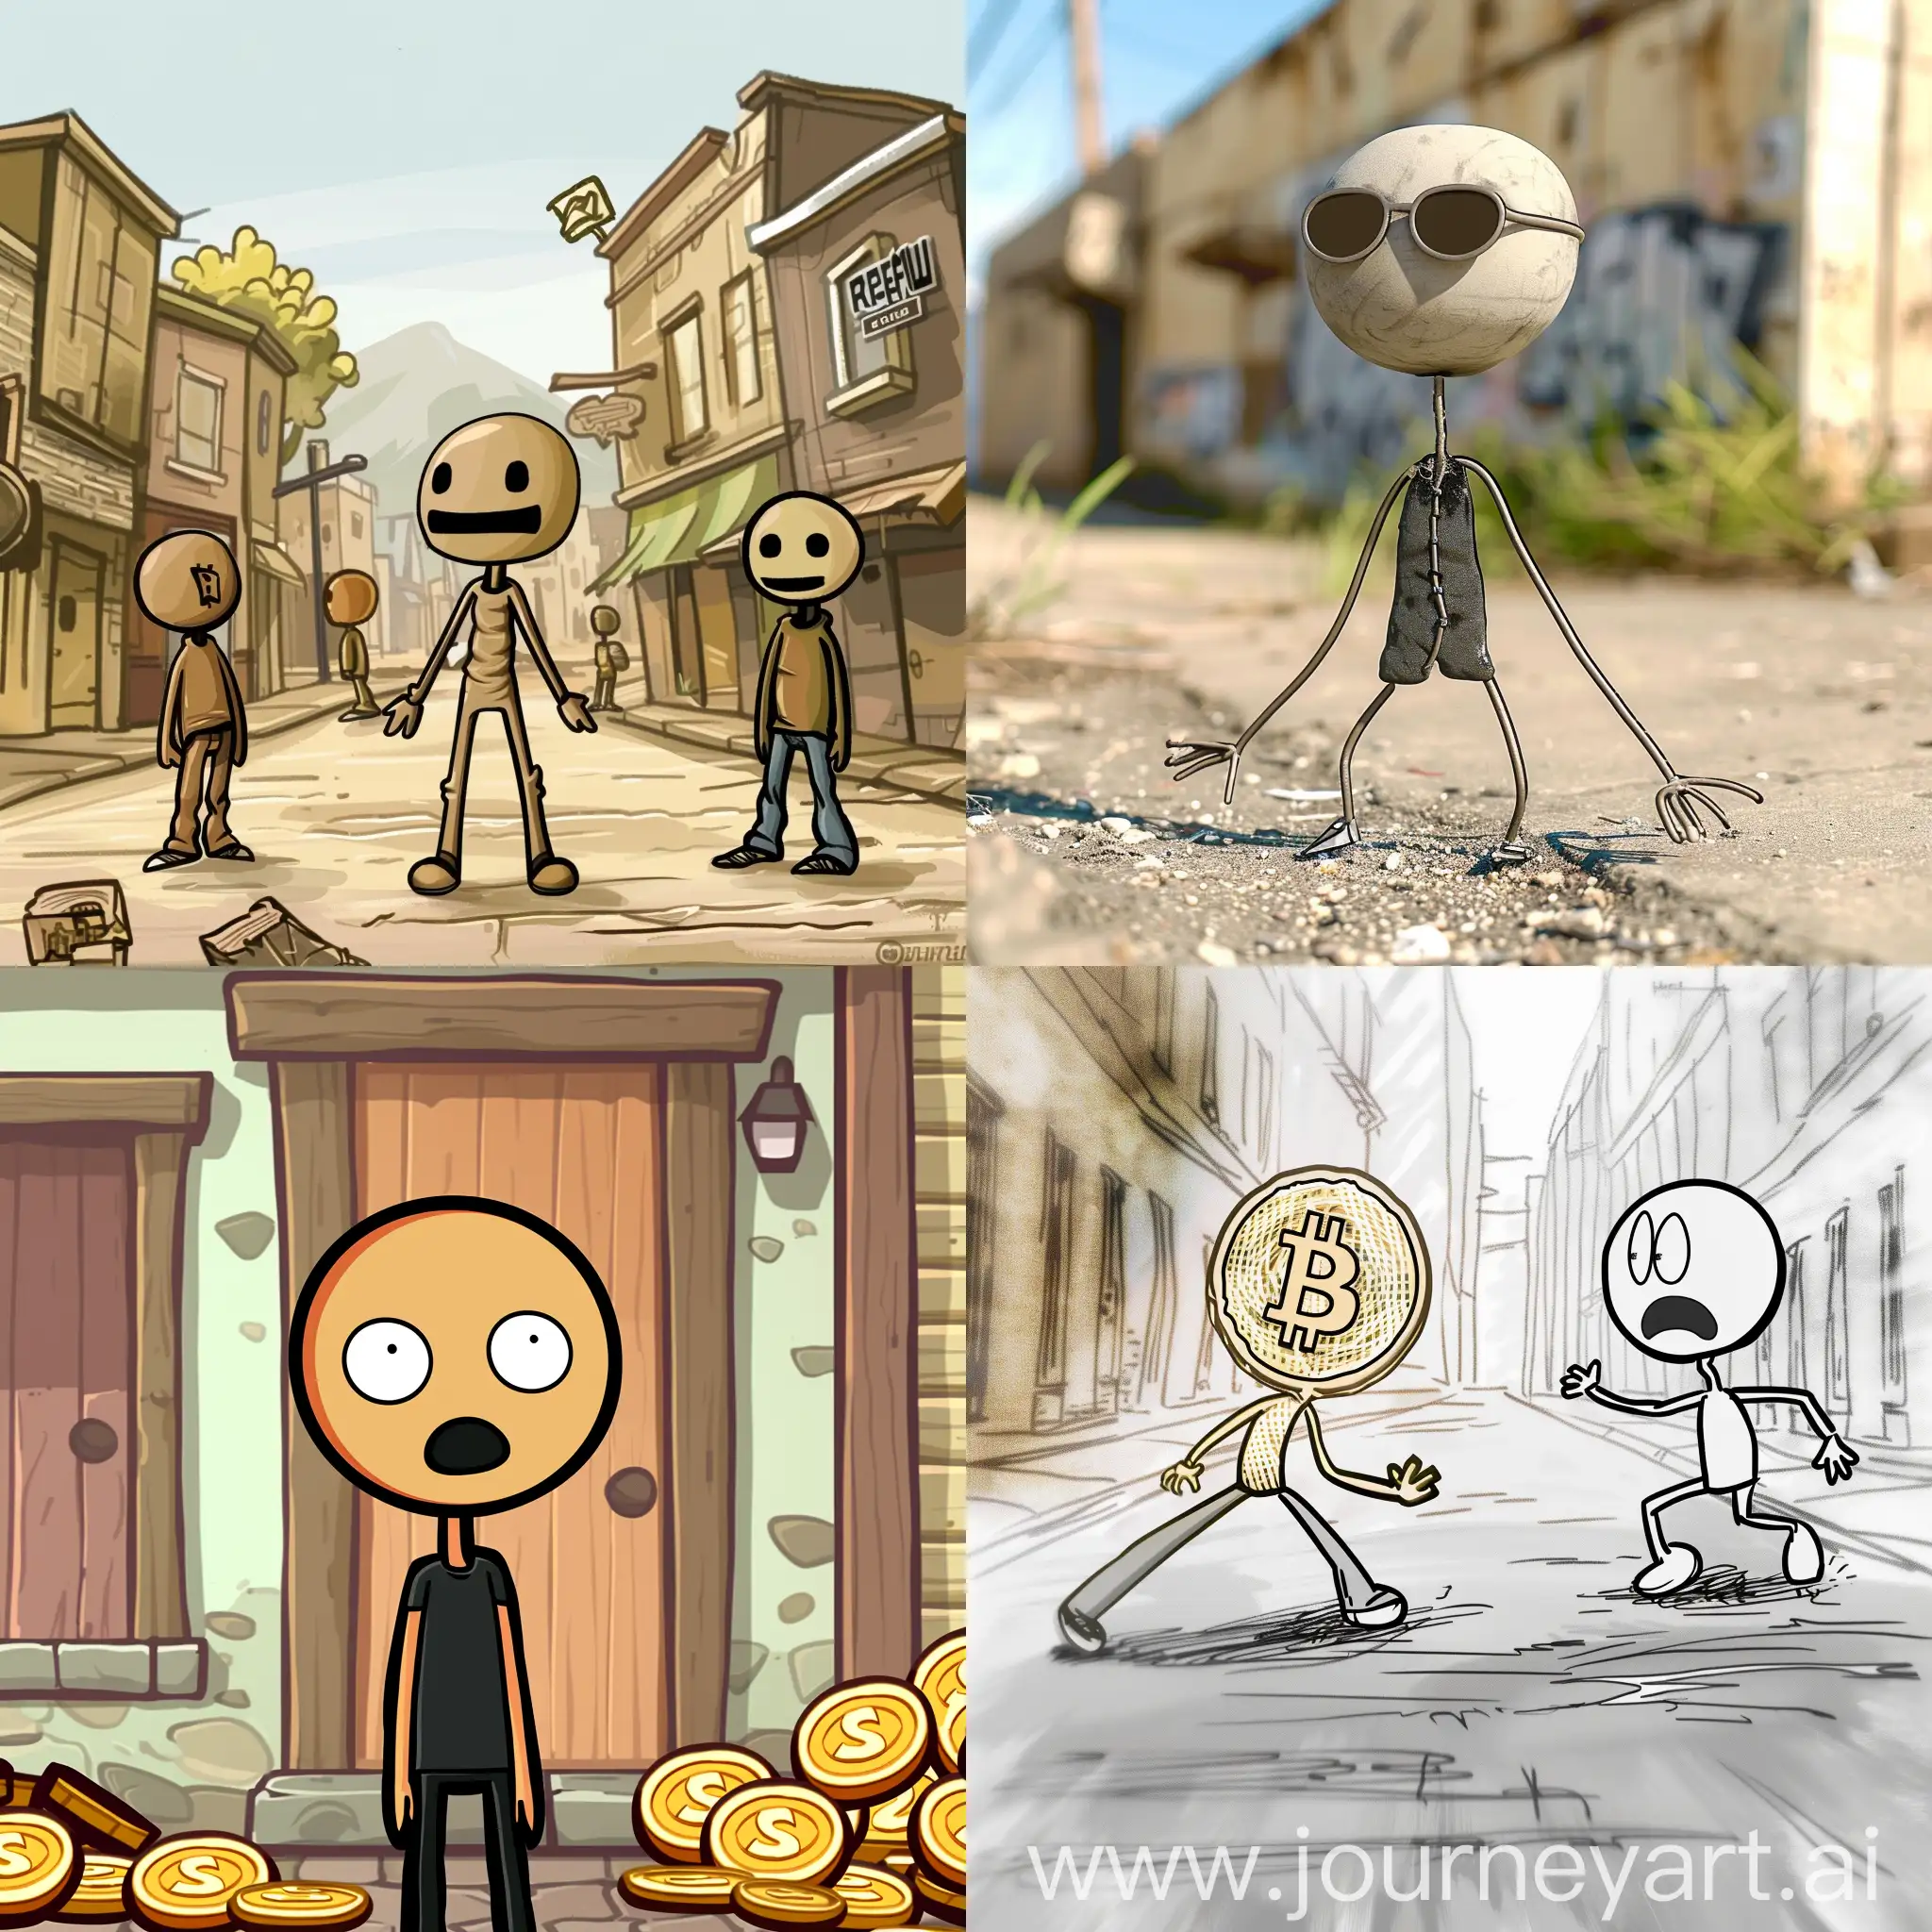 One day, ROB, a young entrepreneur stick man, living in the small town of Sticksville, discovers a rising phenomenon on the internet: a meme token called "Retire on Blast." Seeing the potential of this token, ROB decides to inform the residents of Sticksville about this exciting opportunity.